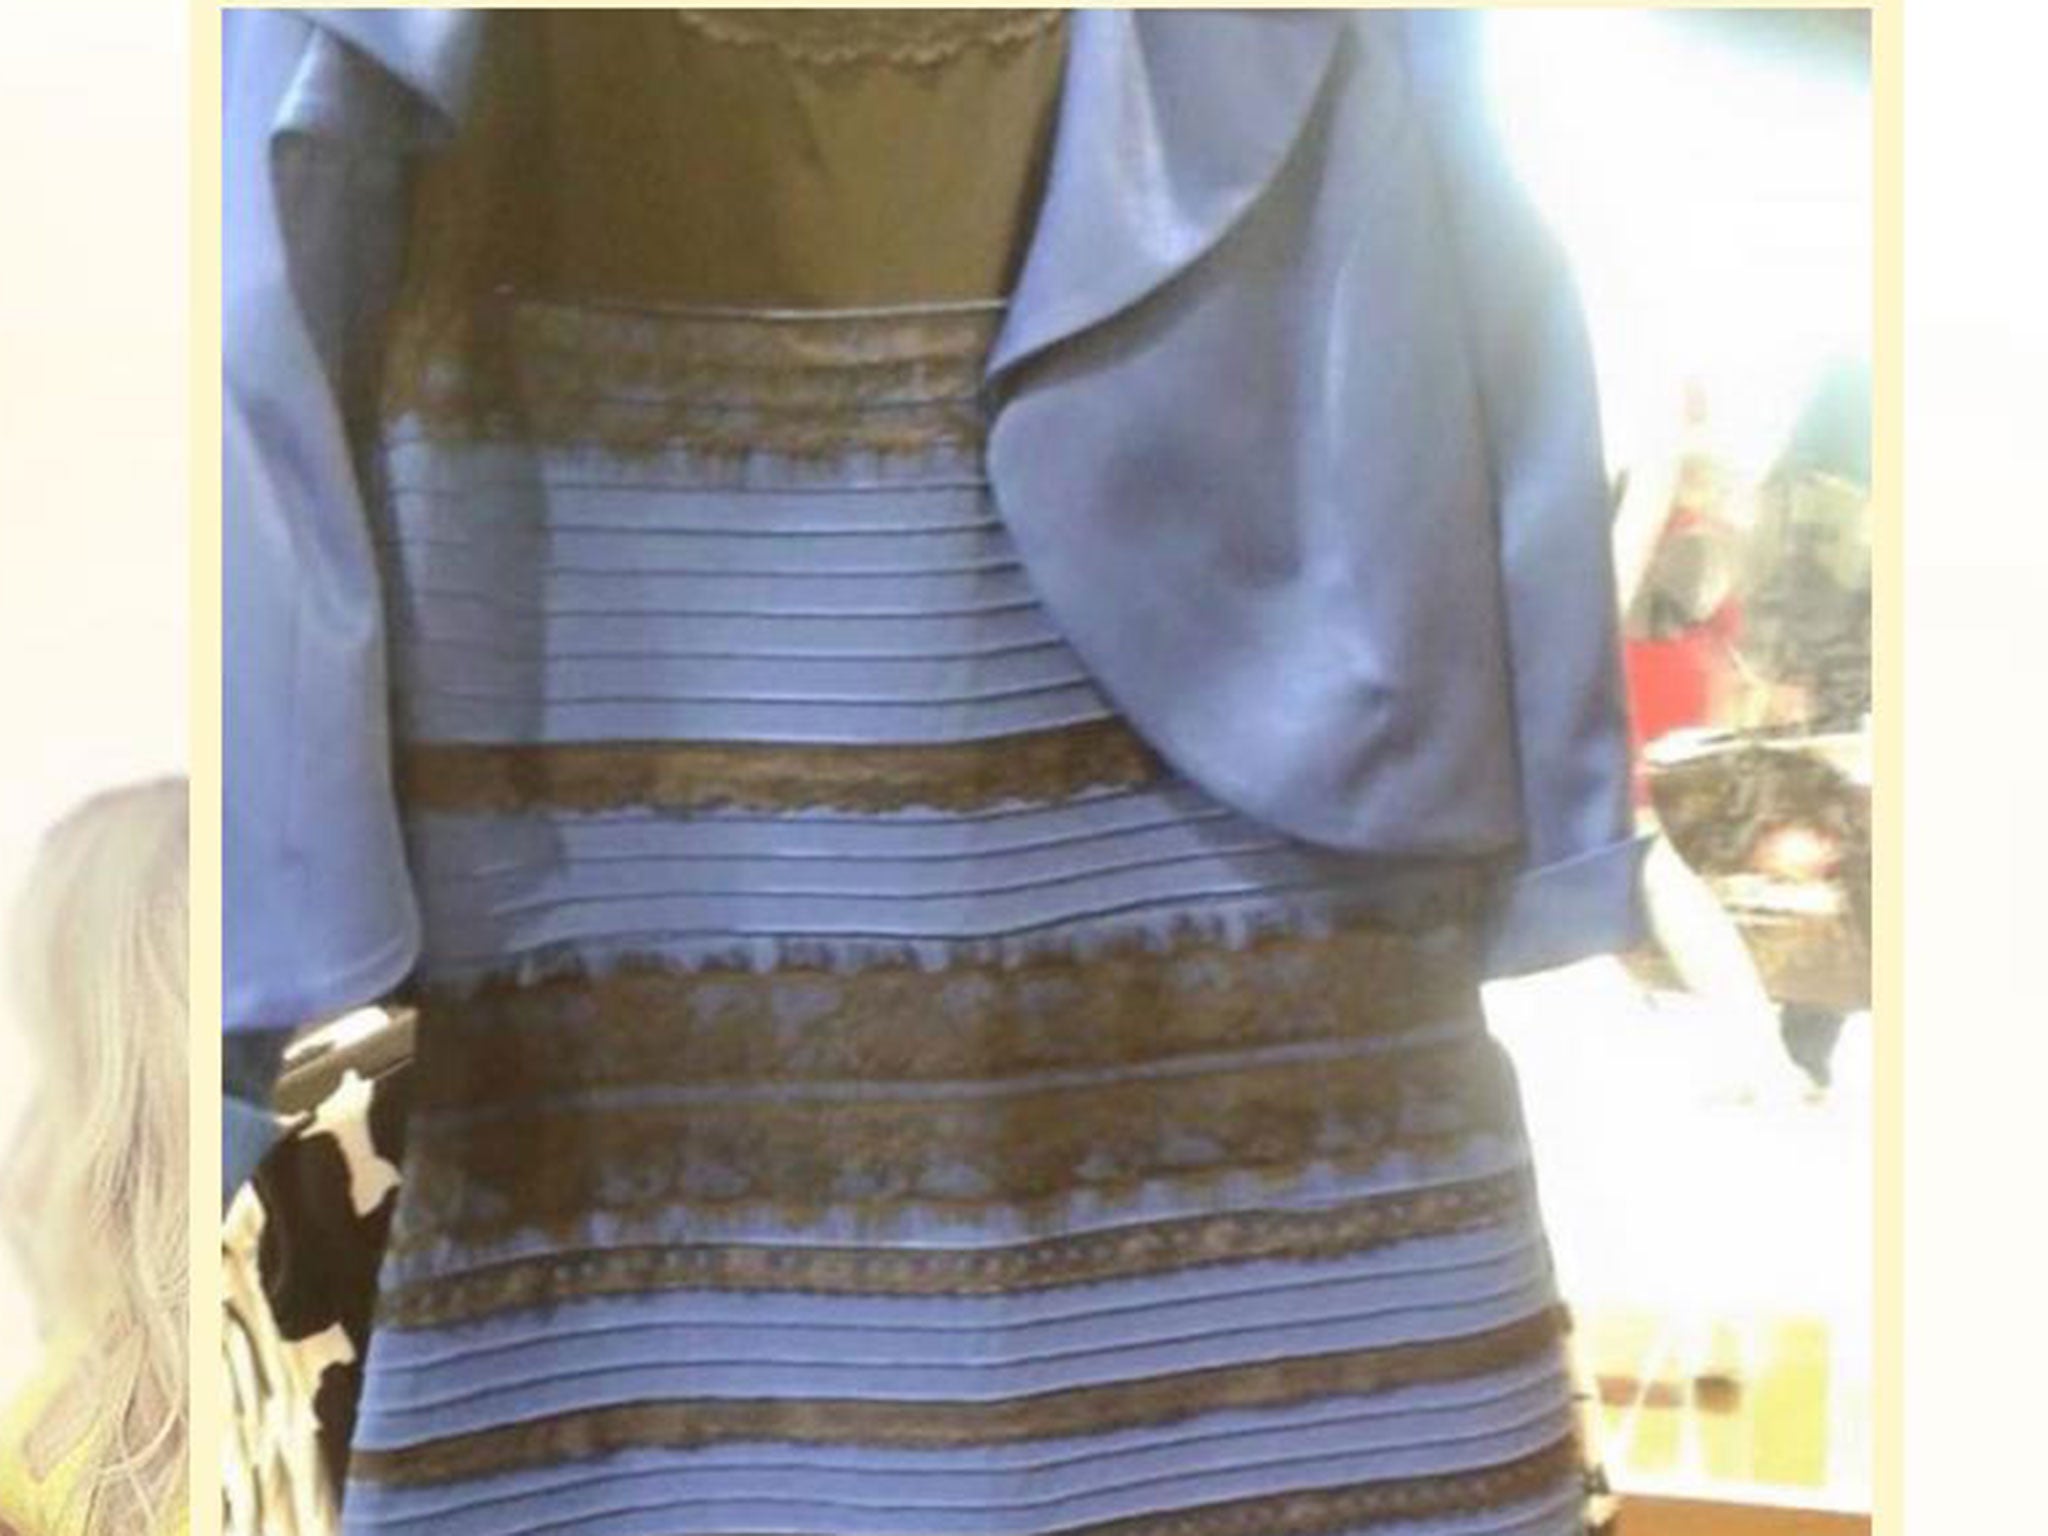 gold and white dress illusion